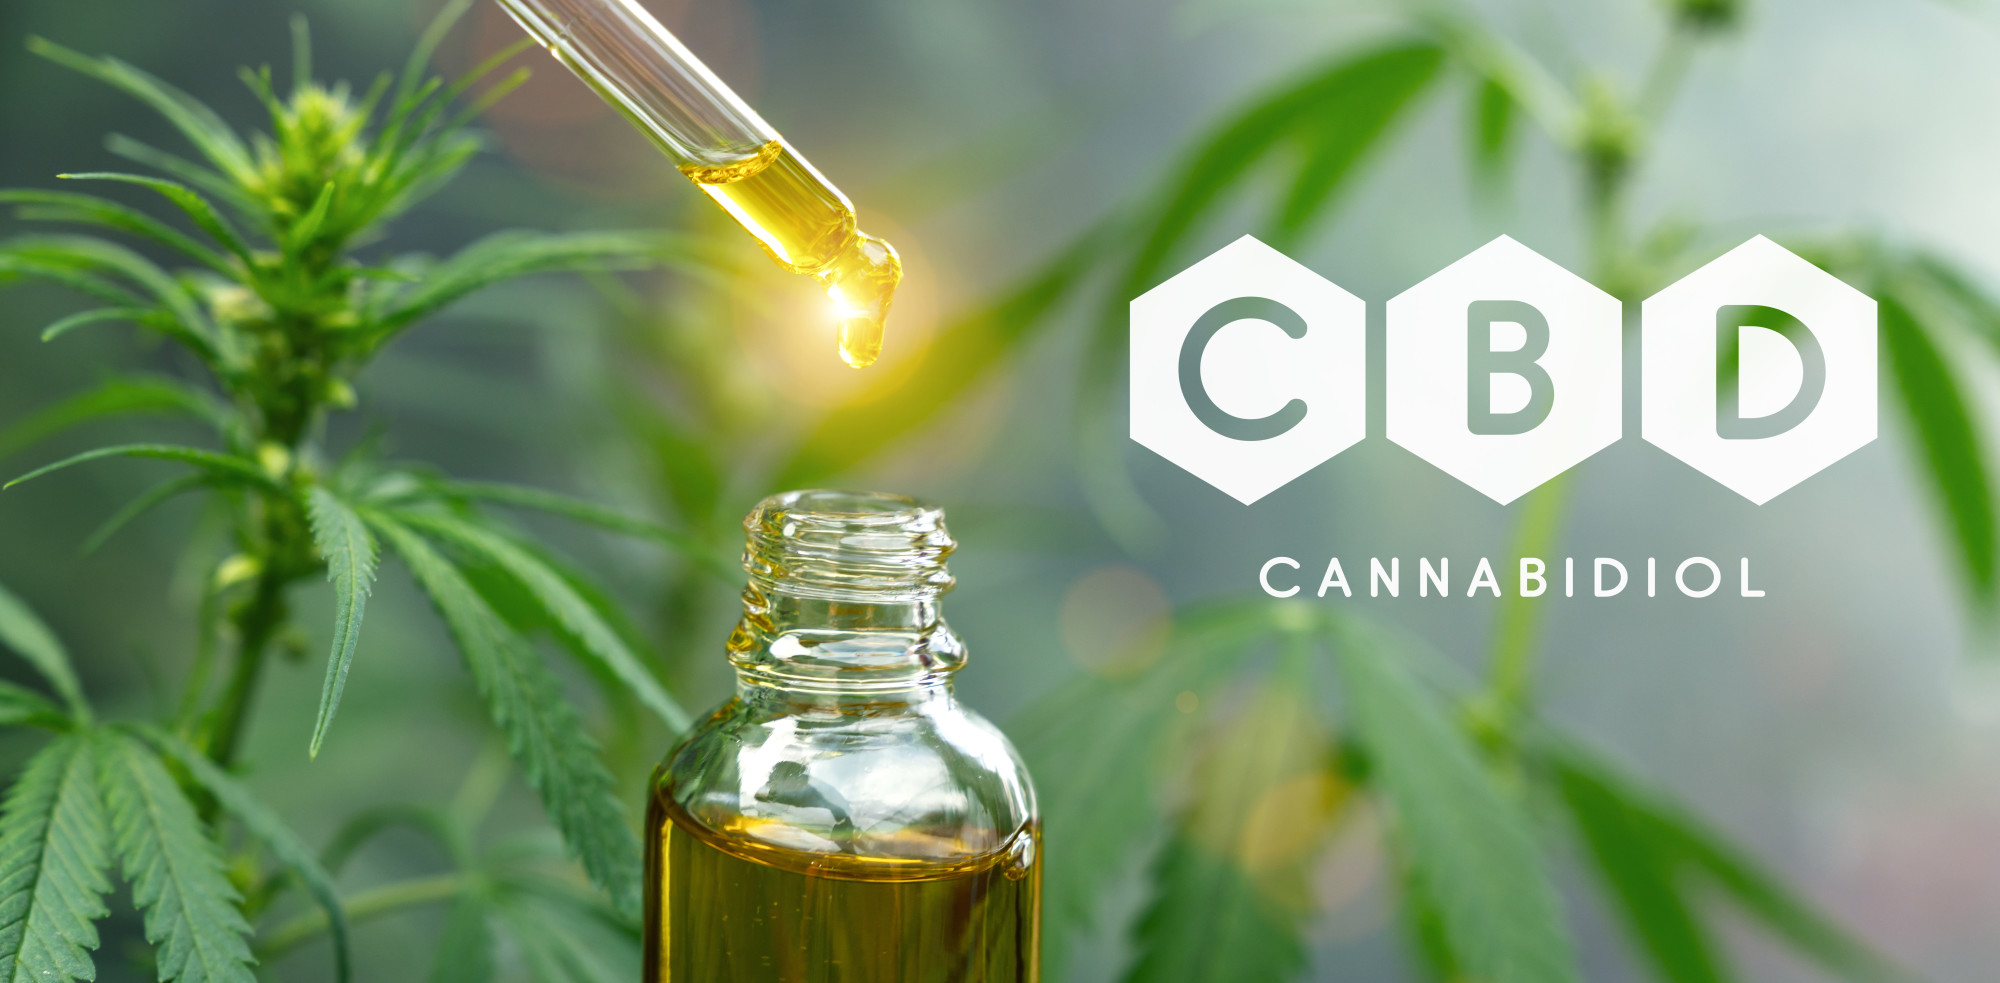 Is The Hype About CBD, Or Cannabidiol, Real?